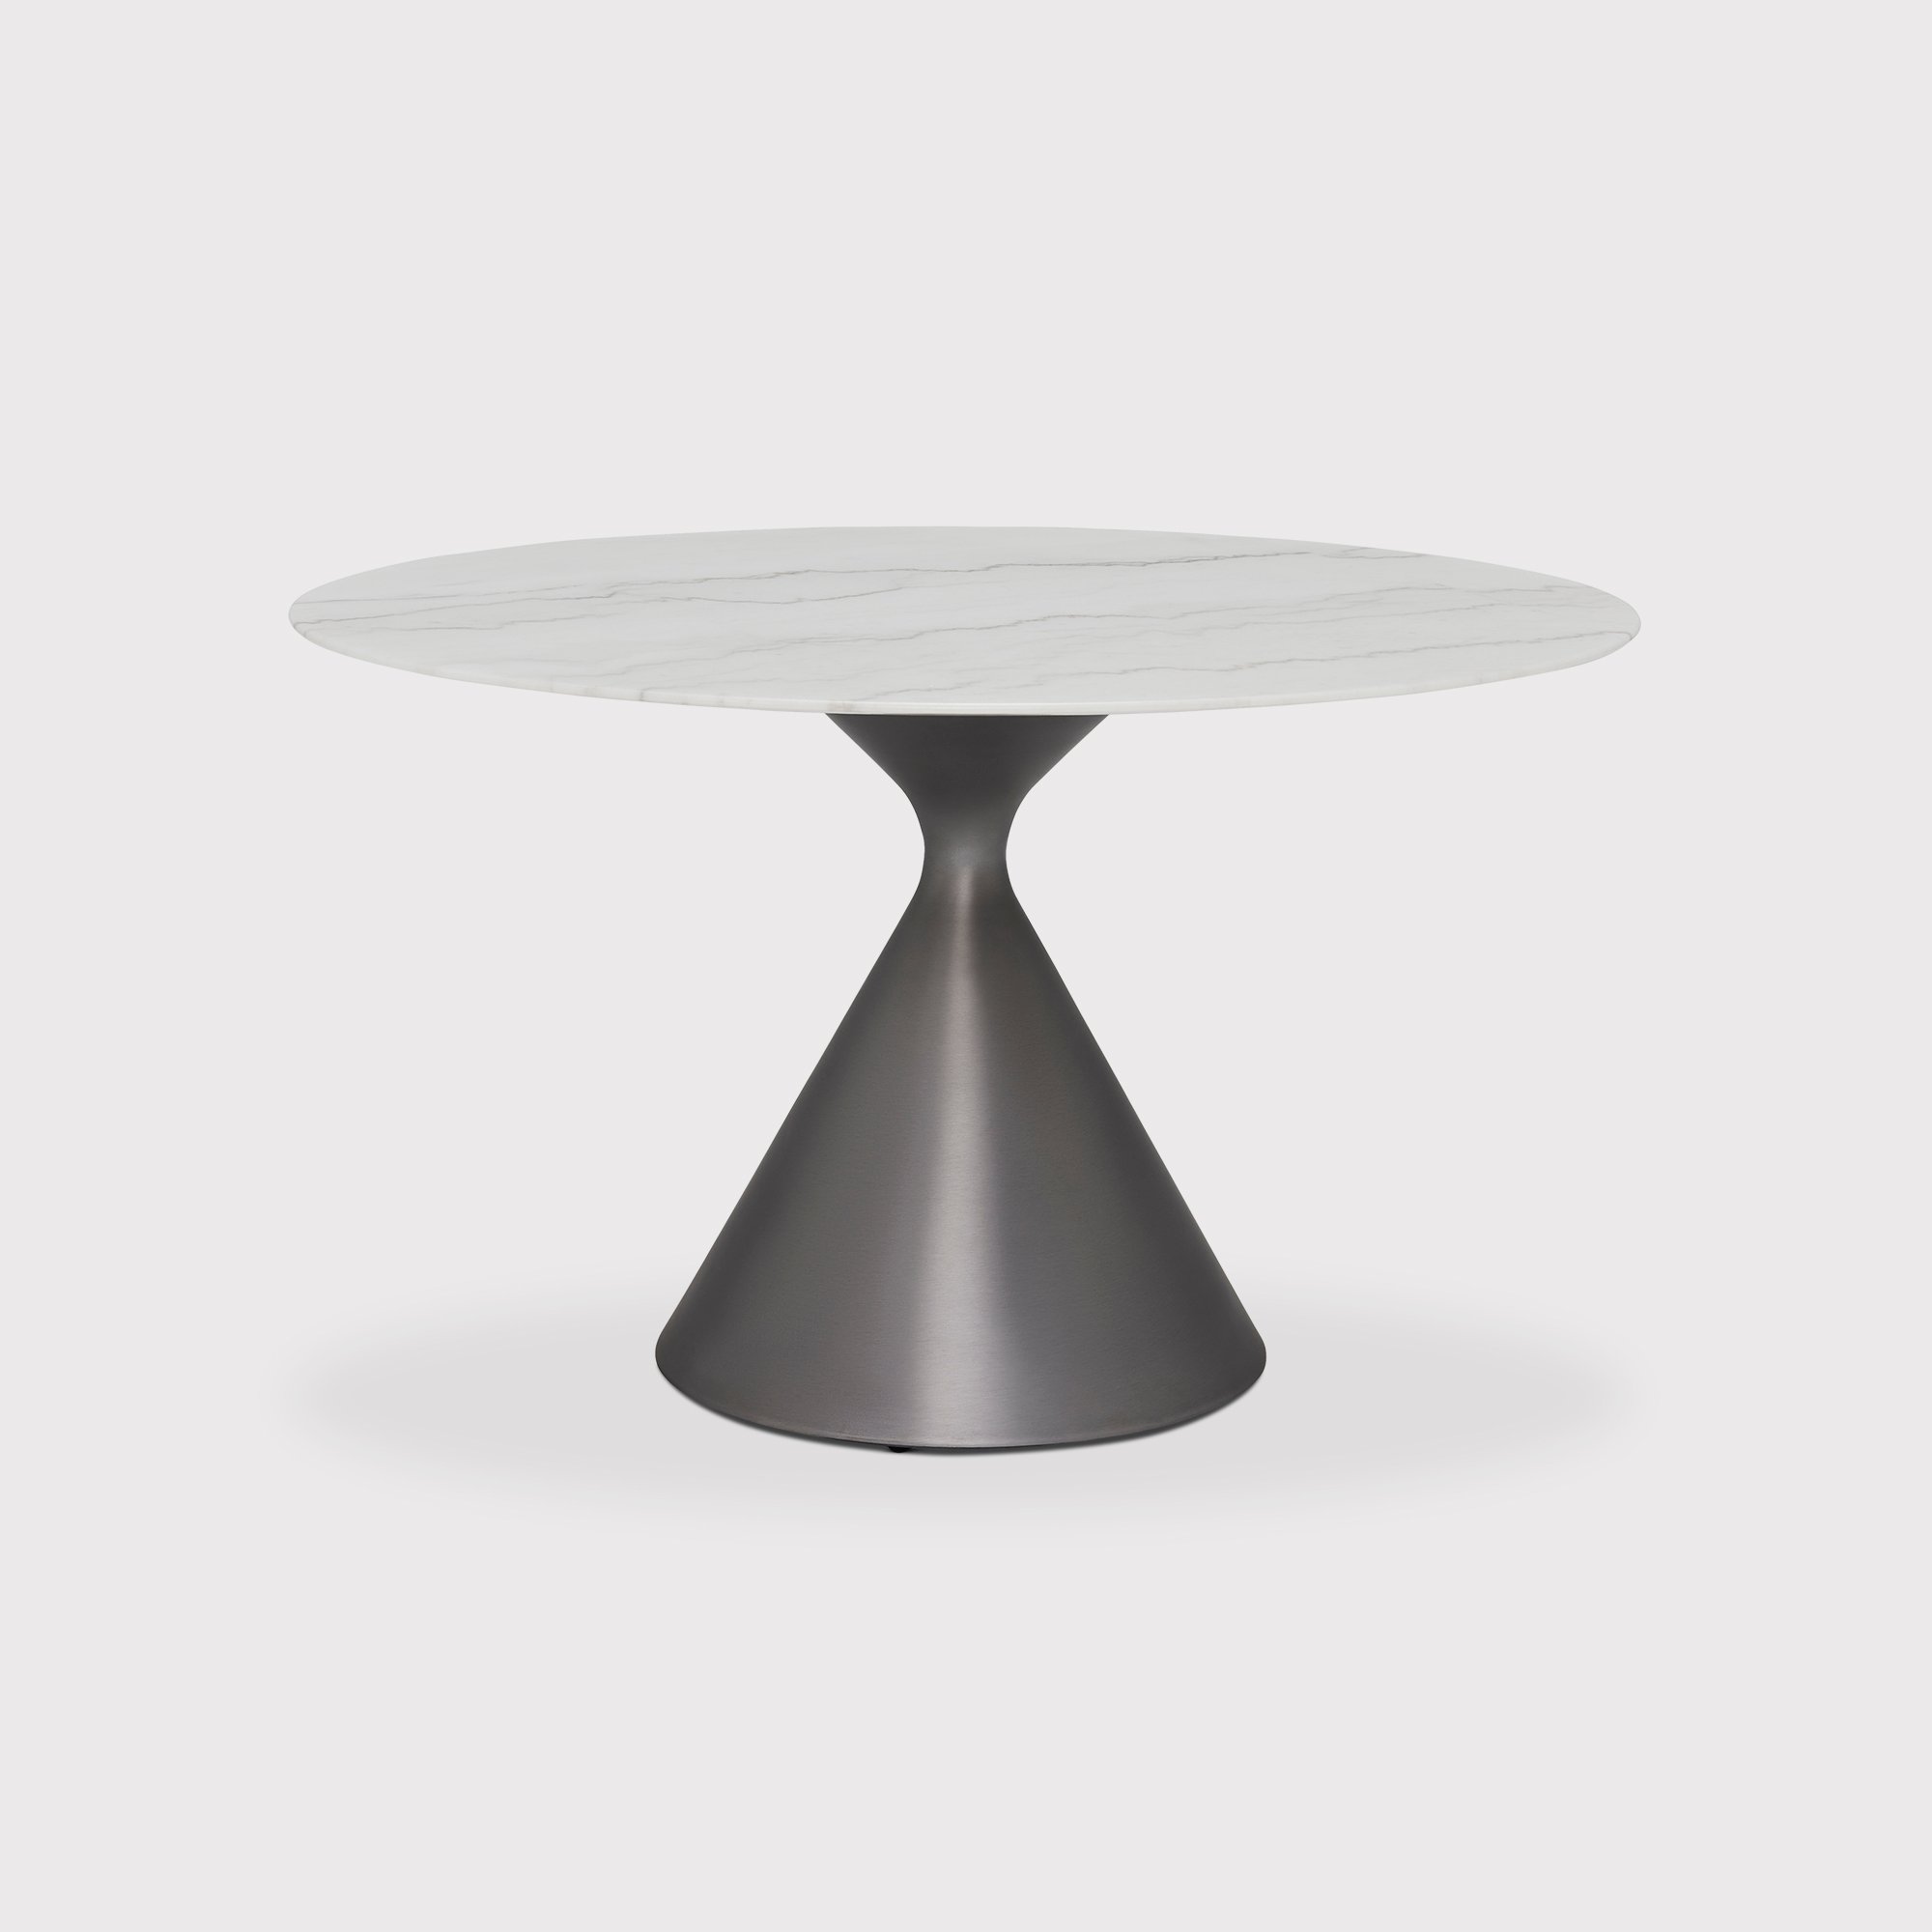 Krista Round Dining Table 130cm, Grey Marble | Barker & Stonehouse